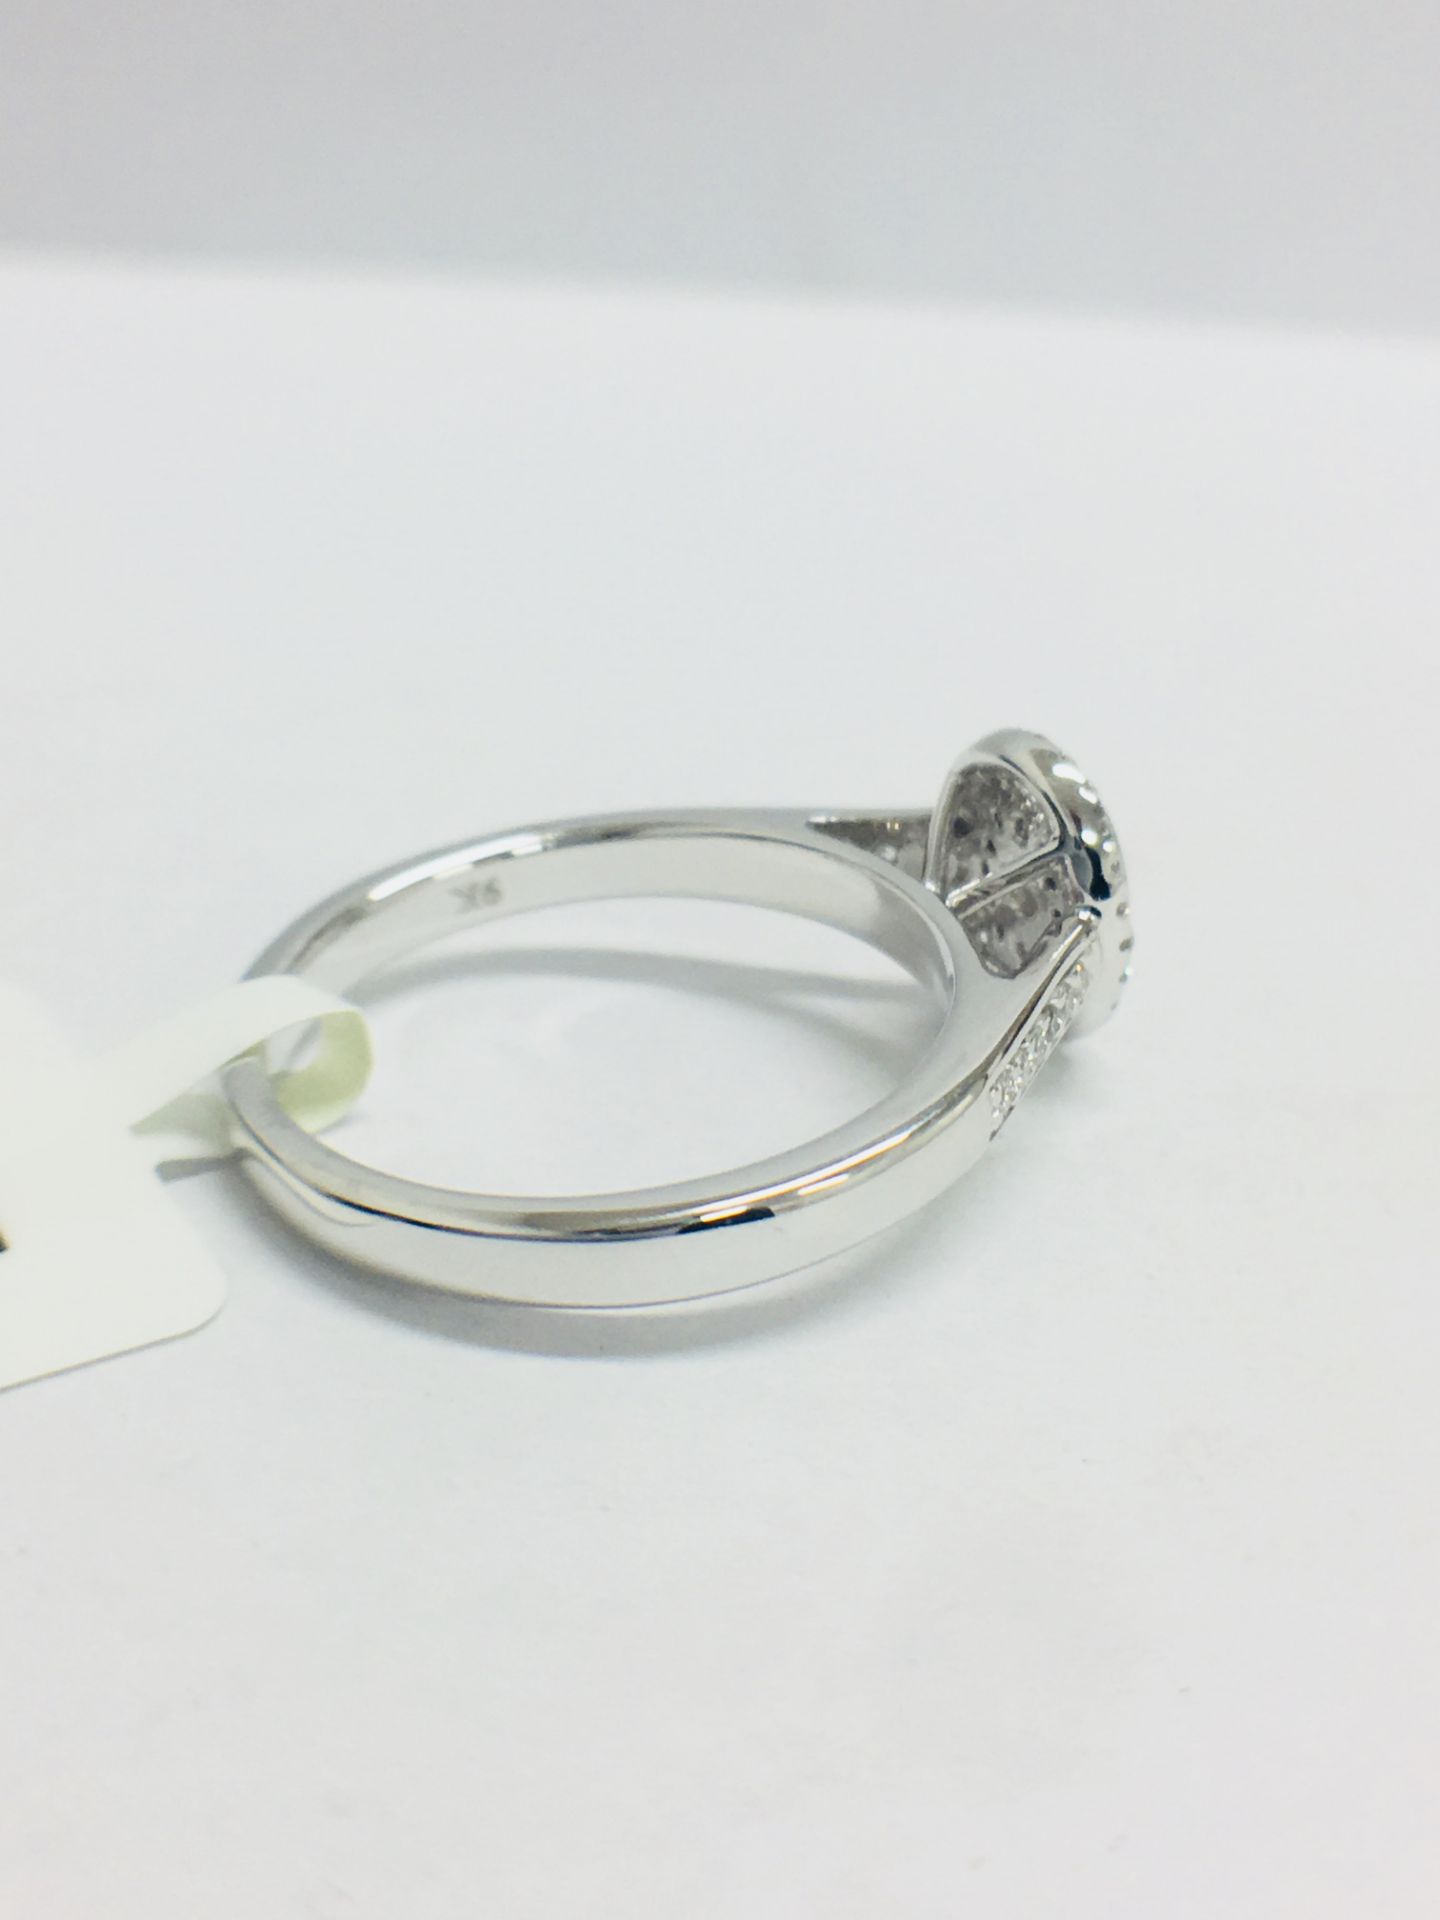 0.33ct diamond set solitaire style ring. Oval setting with small round cut diamonds - Image 3 of 8